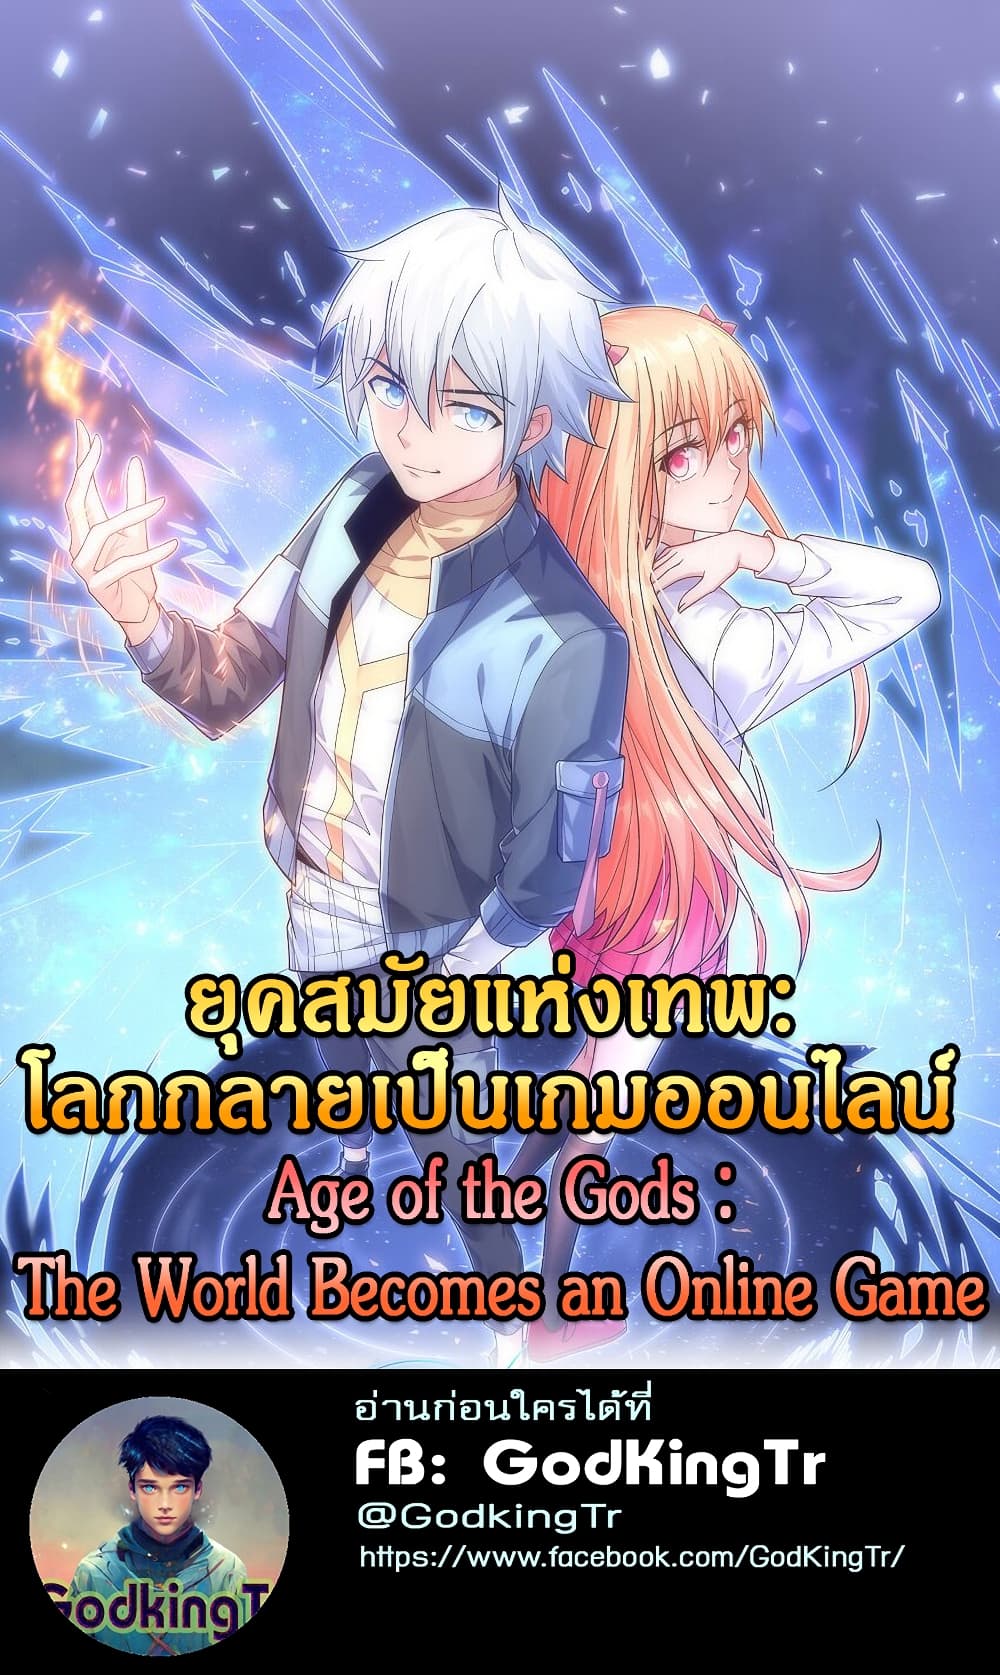 Age of the Gods: The World Becomes an Online Game 11-11